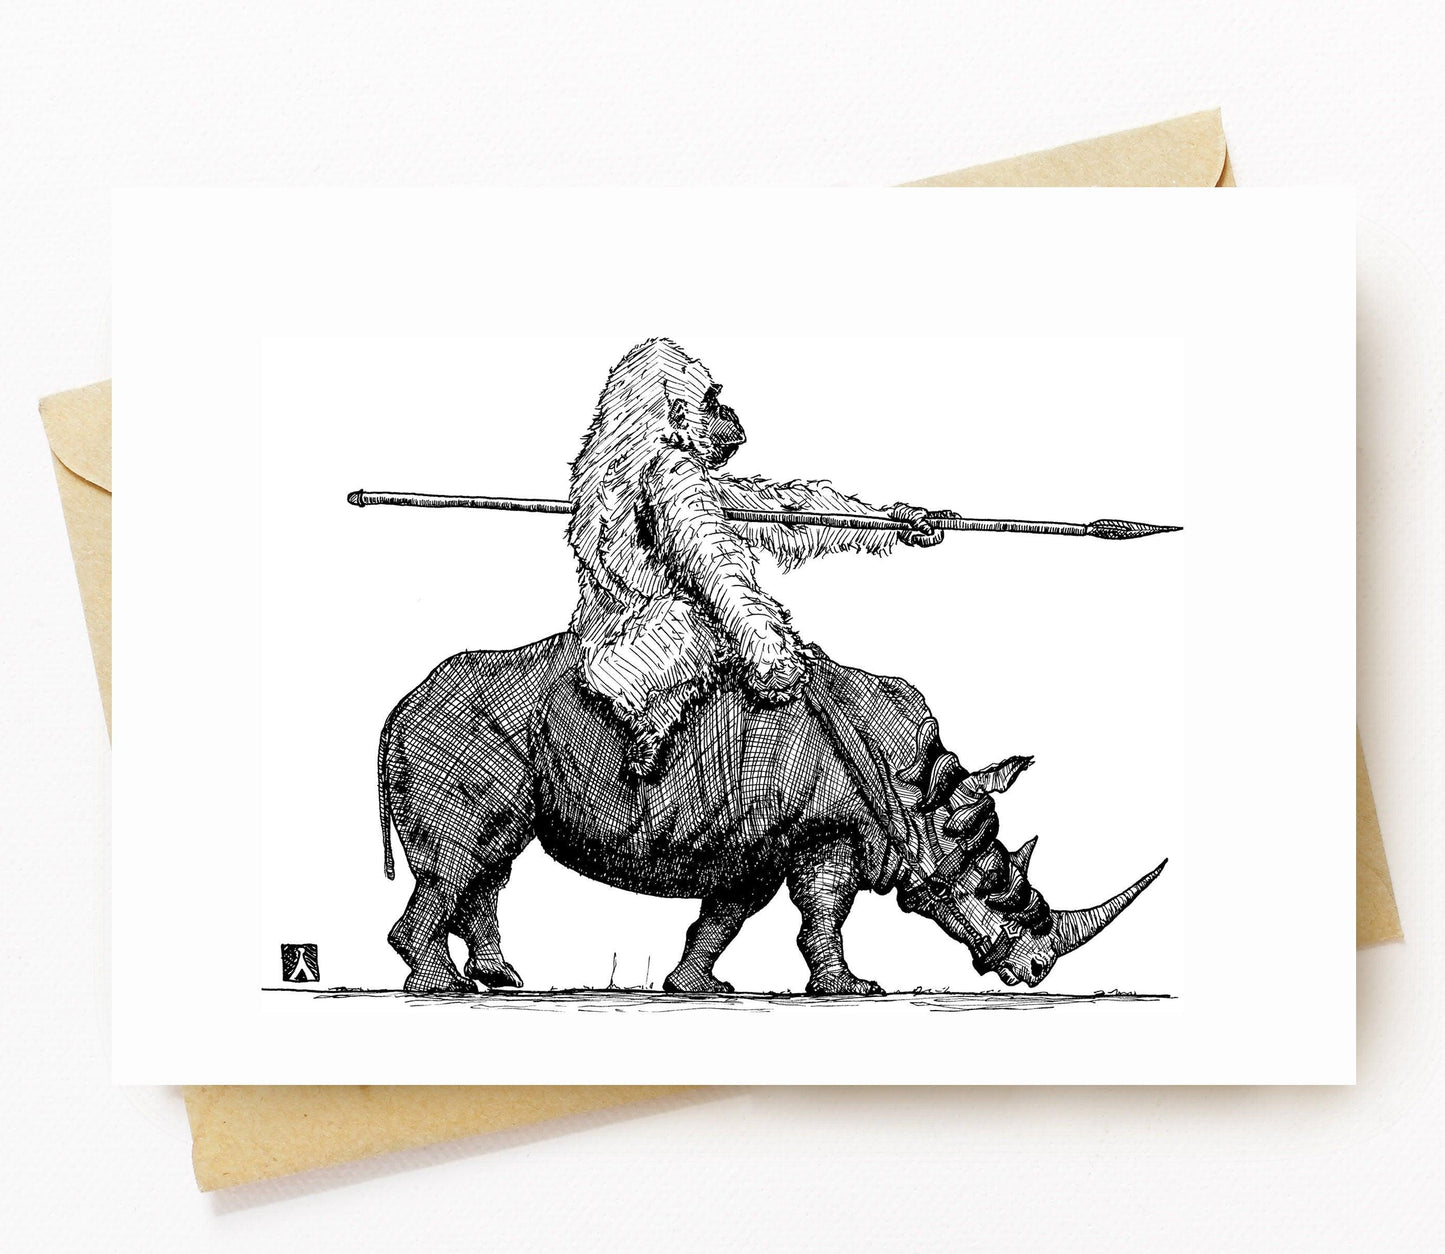 BellavanceInk: Greeting Card With Pen & Ink Drawing of Gorilla On A Rhino 5 x 7 Inches - BellavanceInk